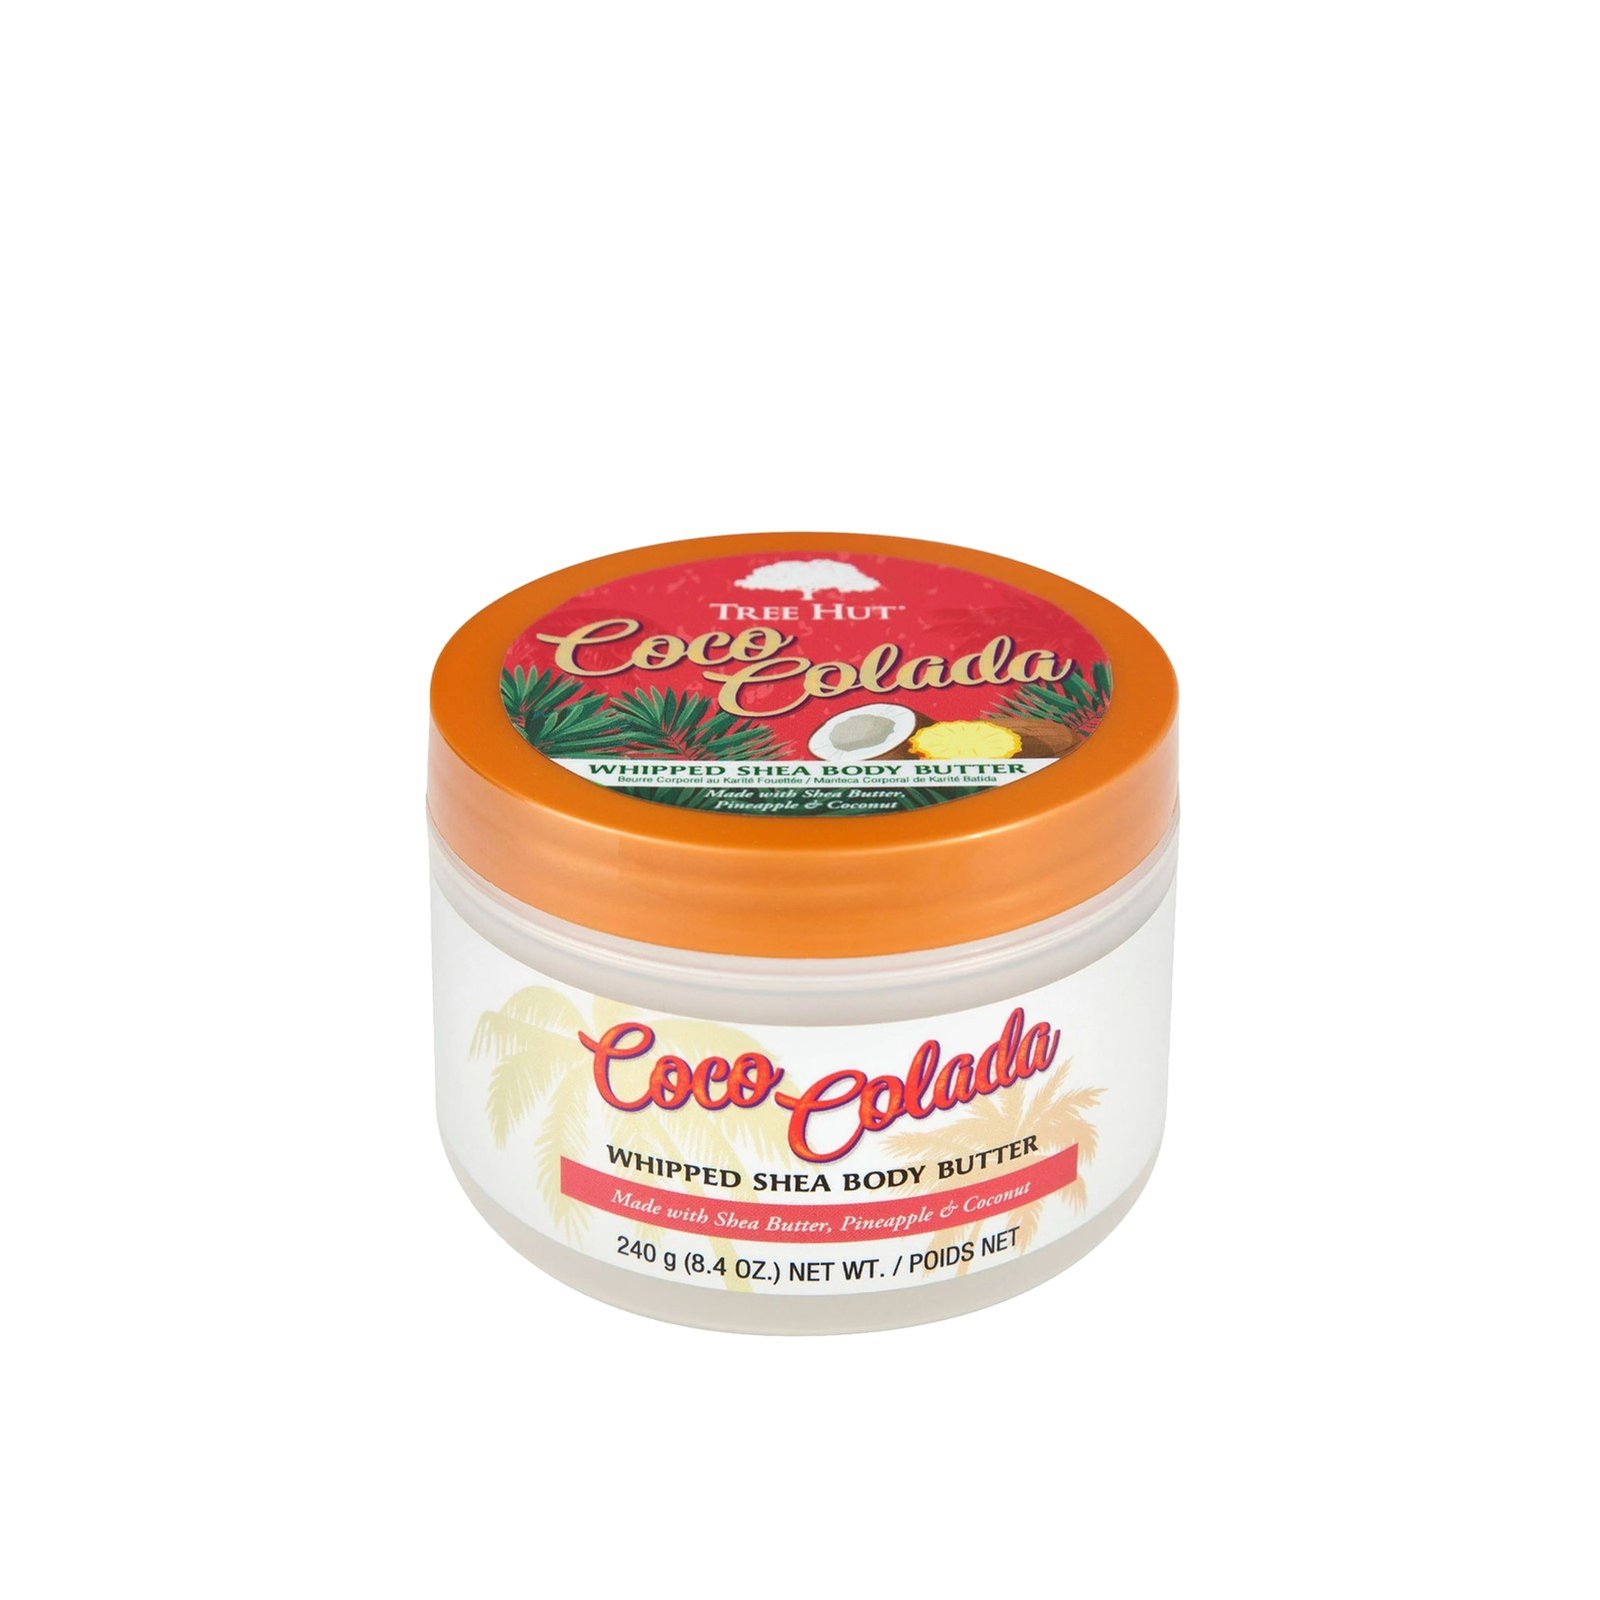 Tree Hut Coco Colada Whipped Shea Body Butter 240g (8.4 oz)